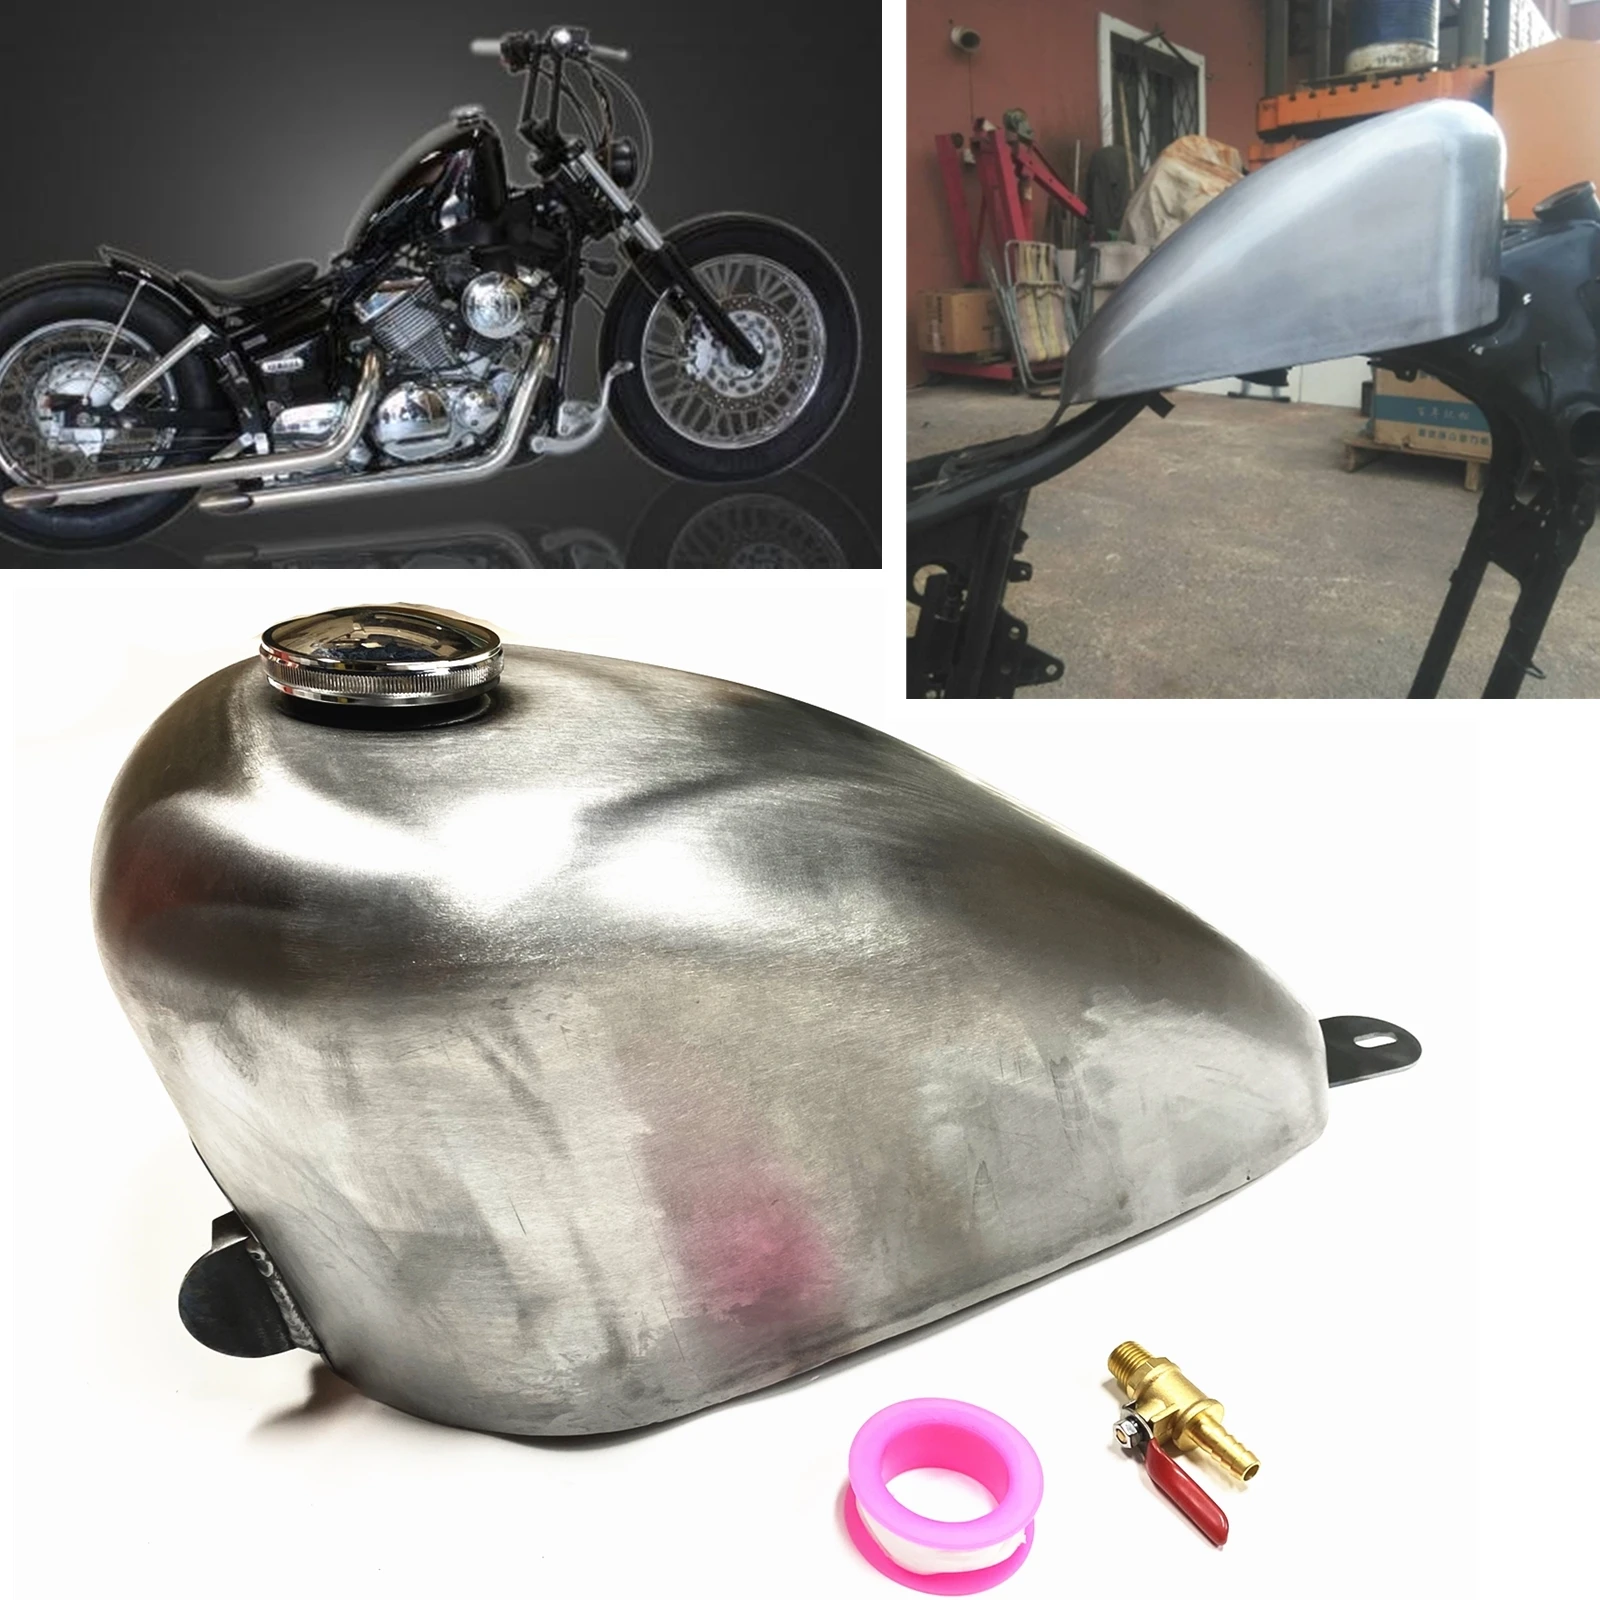 7L Petrol Gas Fuel Tank For YAMAHA Virago XV250 With Cap Handmade Modified Motorcycle Motorbike Elding Oil Gasoline Fueling Can